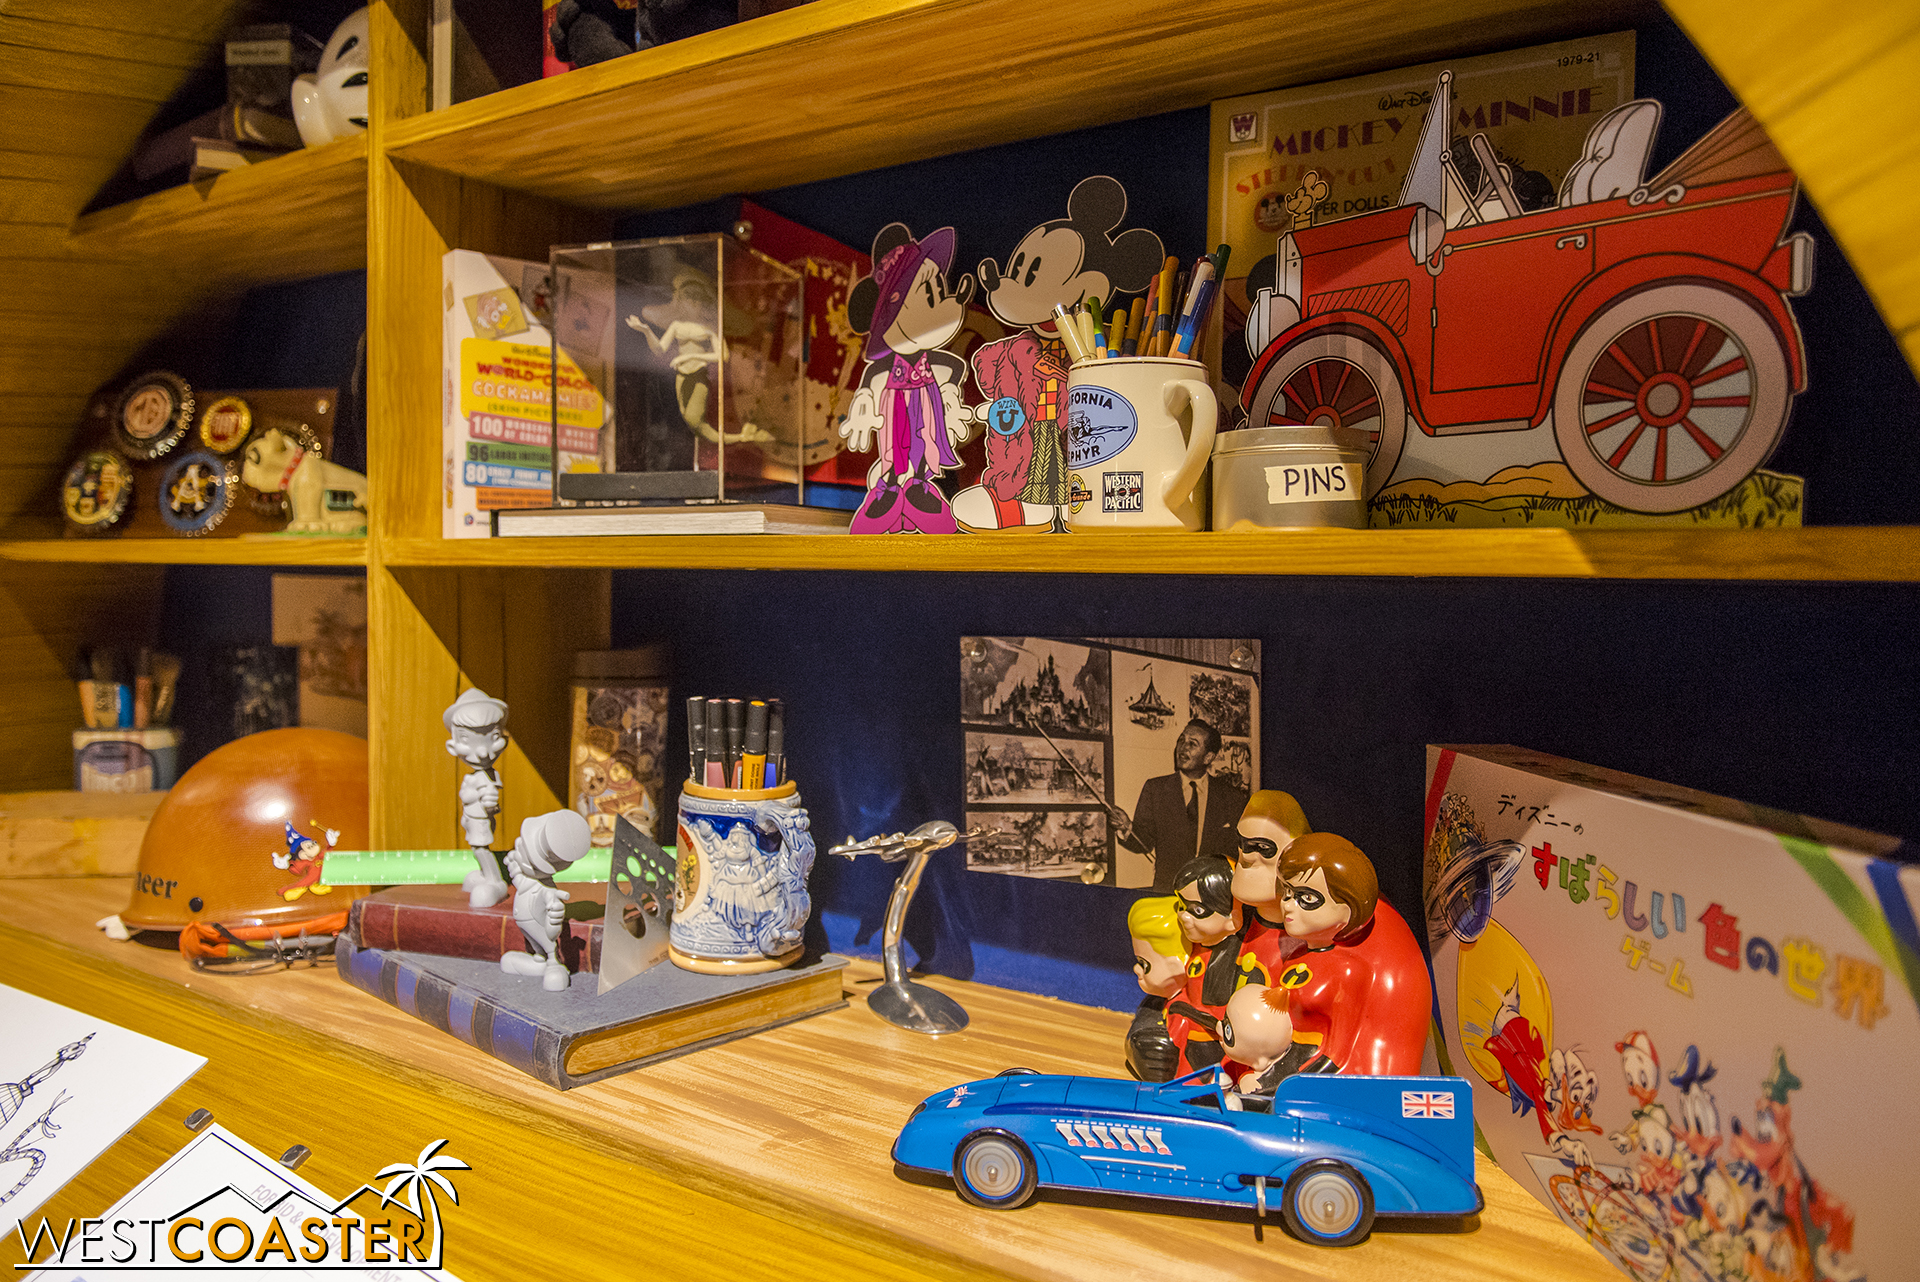  The back shelf has also been given a bit of “Pixar-ization” too. 